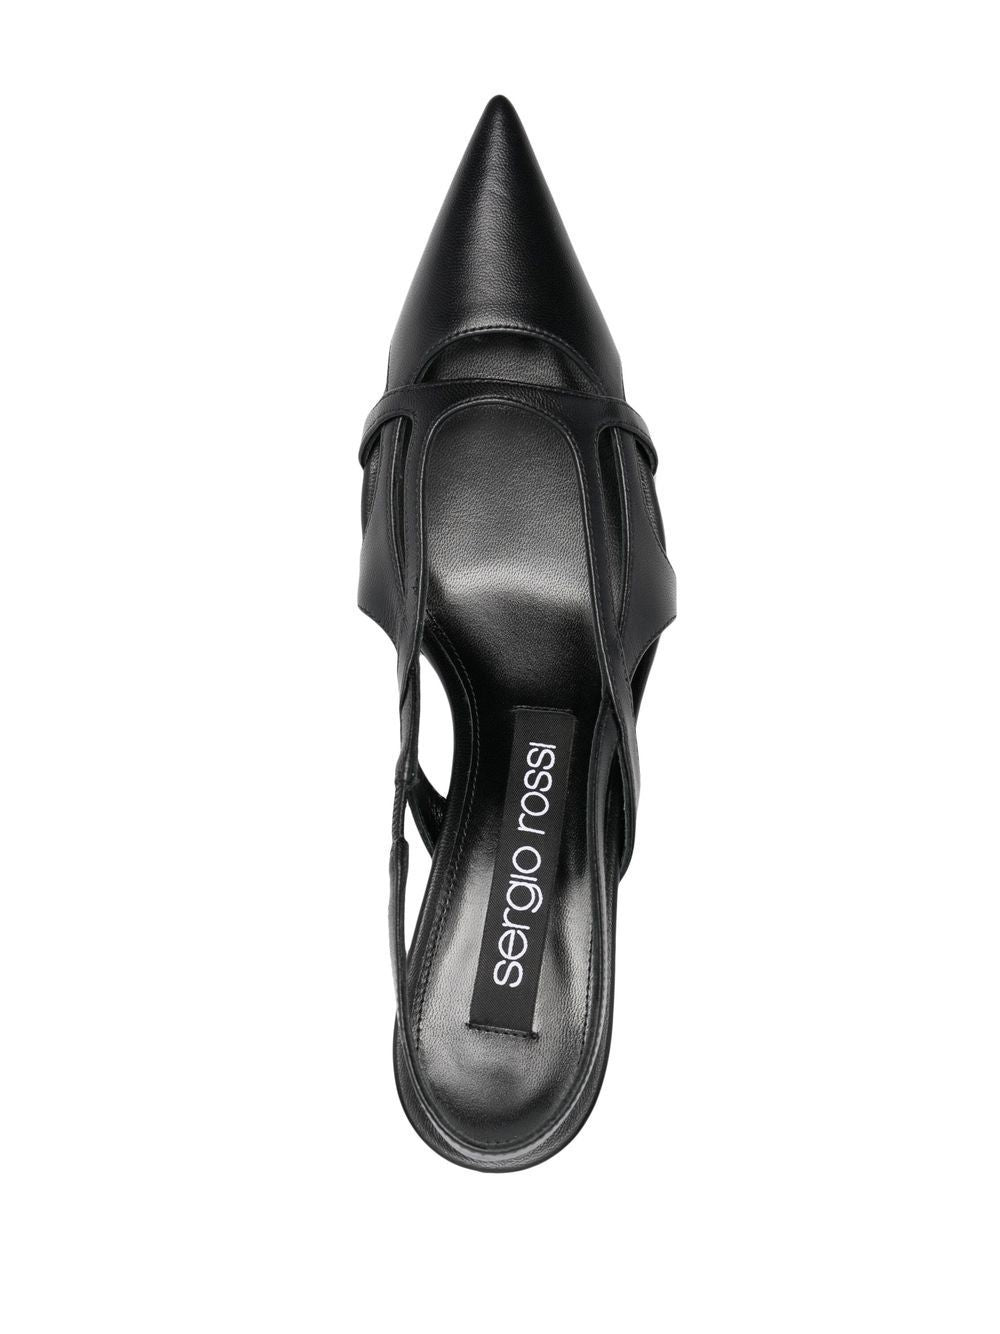 SERGIO ROSSI Black Leather Slingback Pumps for Women